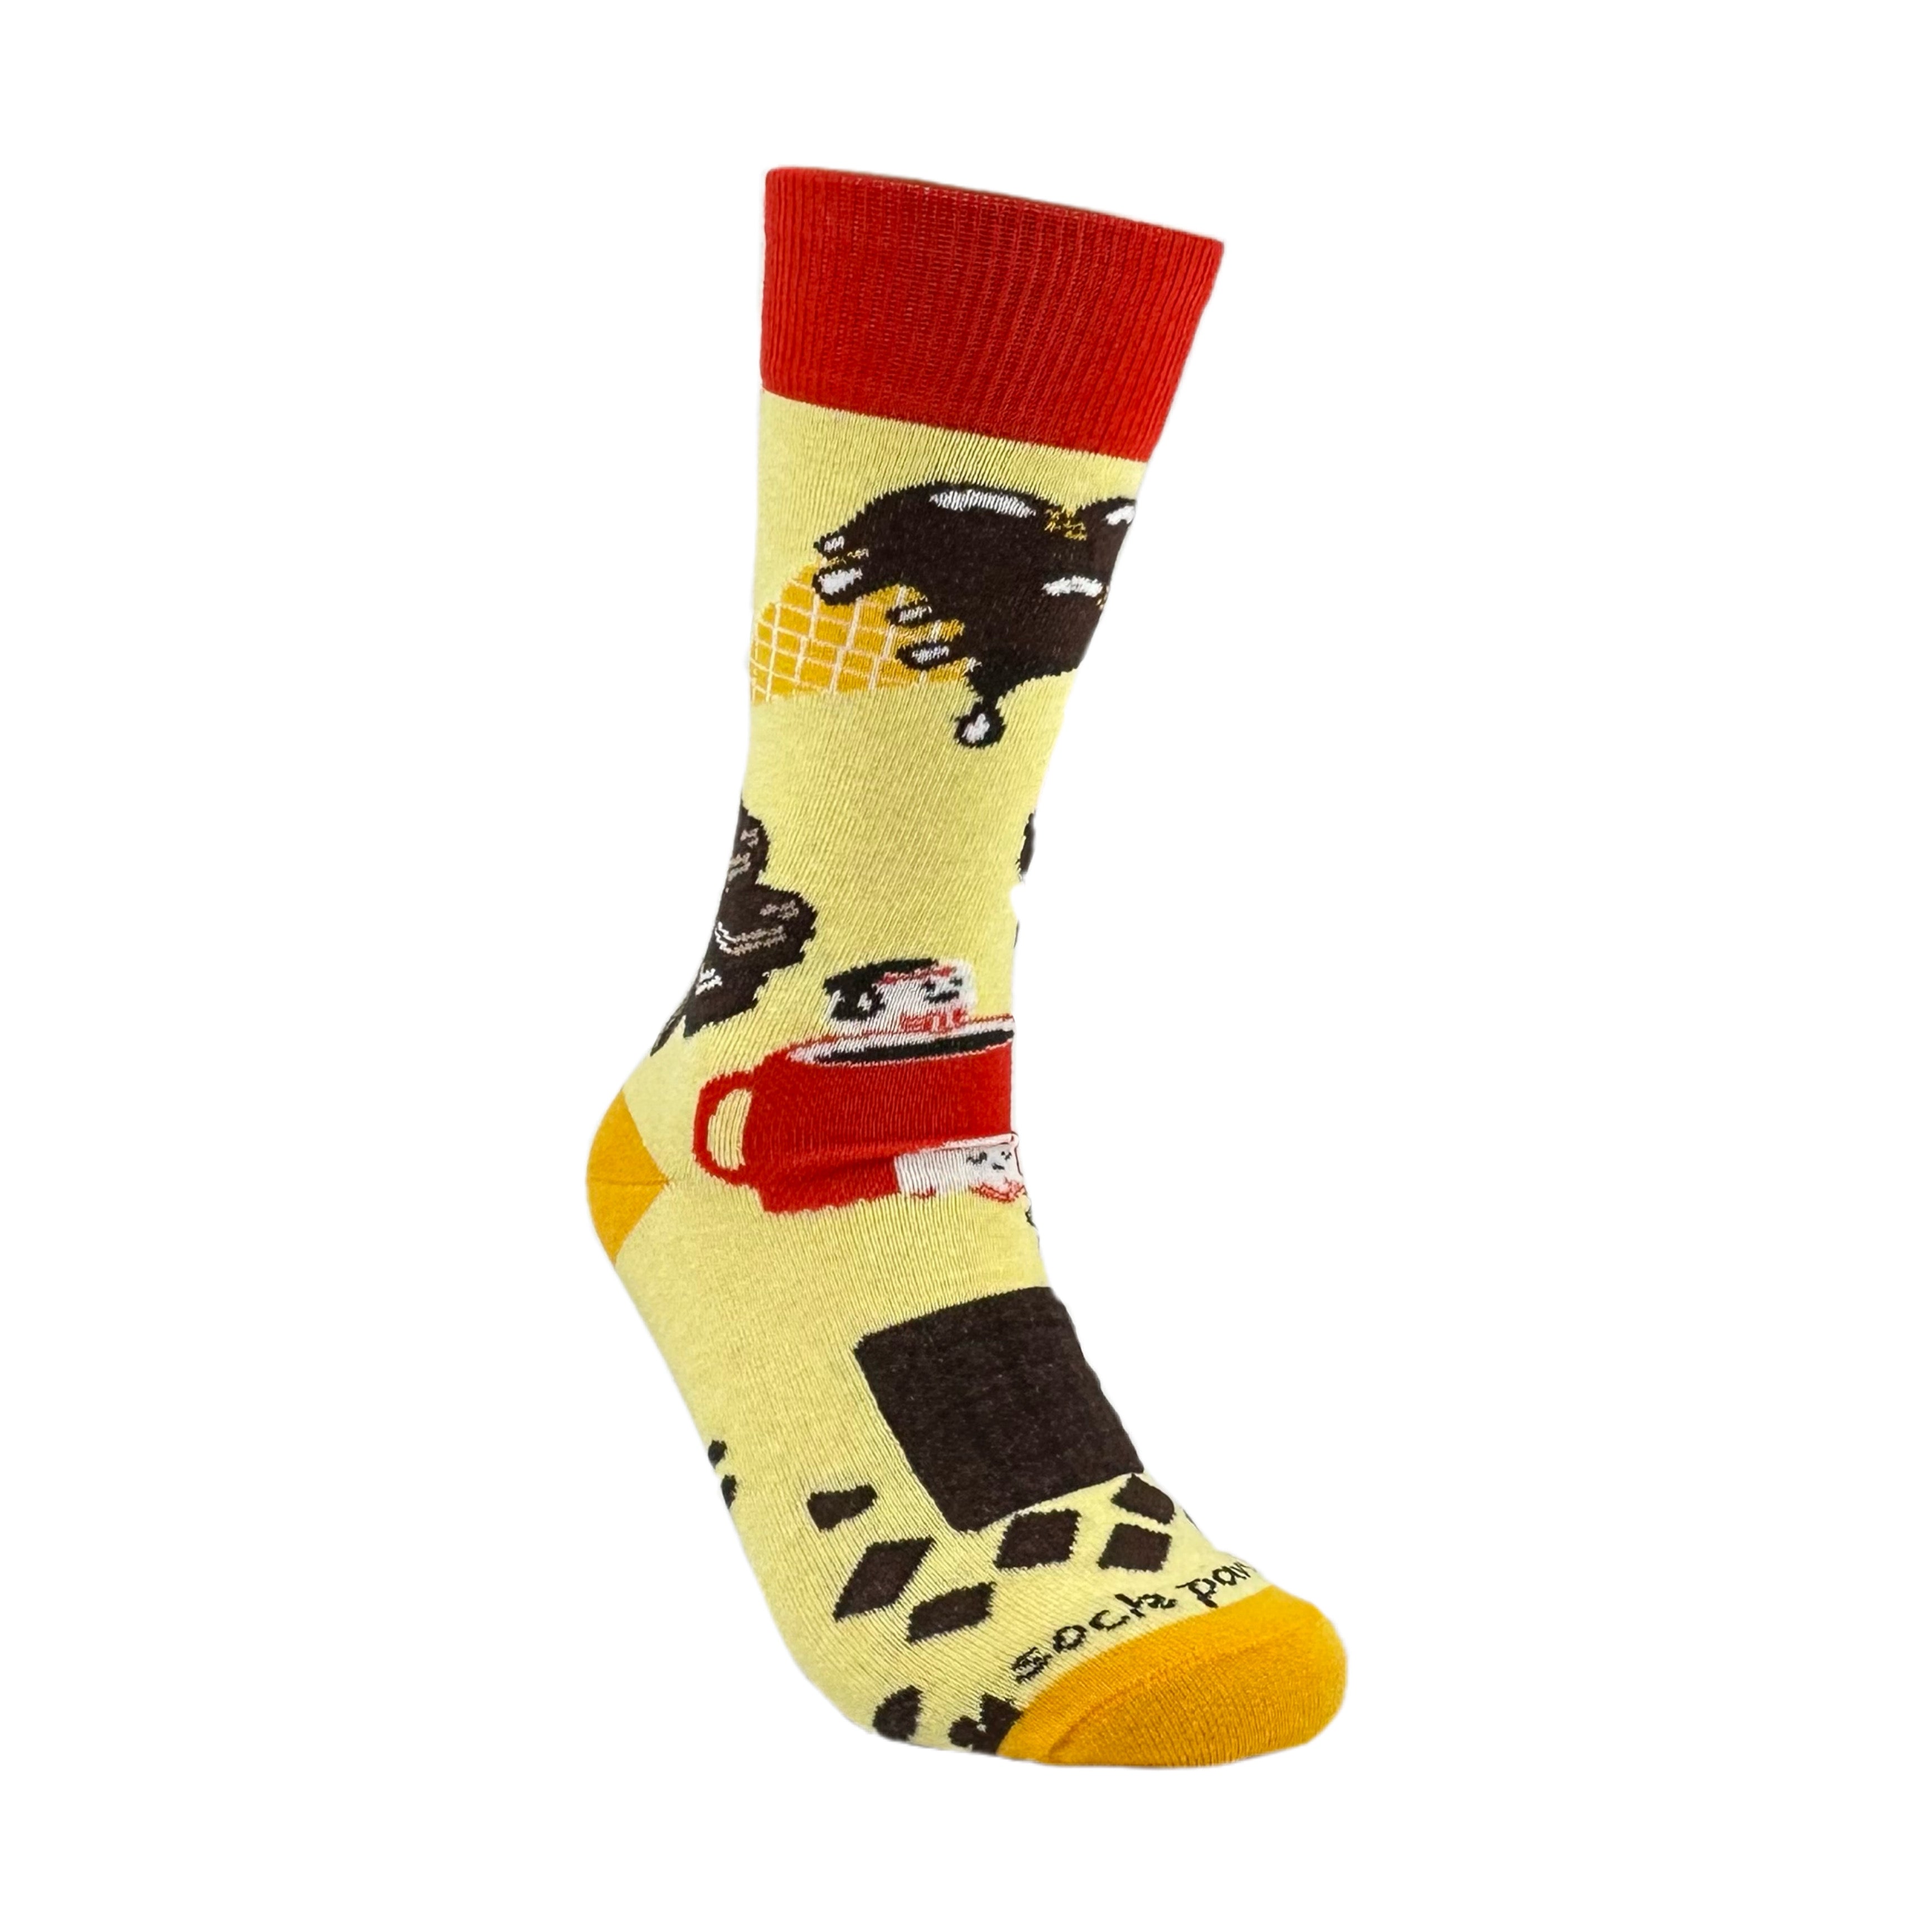 Chocolate Party Time Socks from the Sock Panda (Adult Medium)